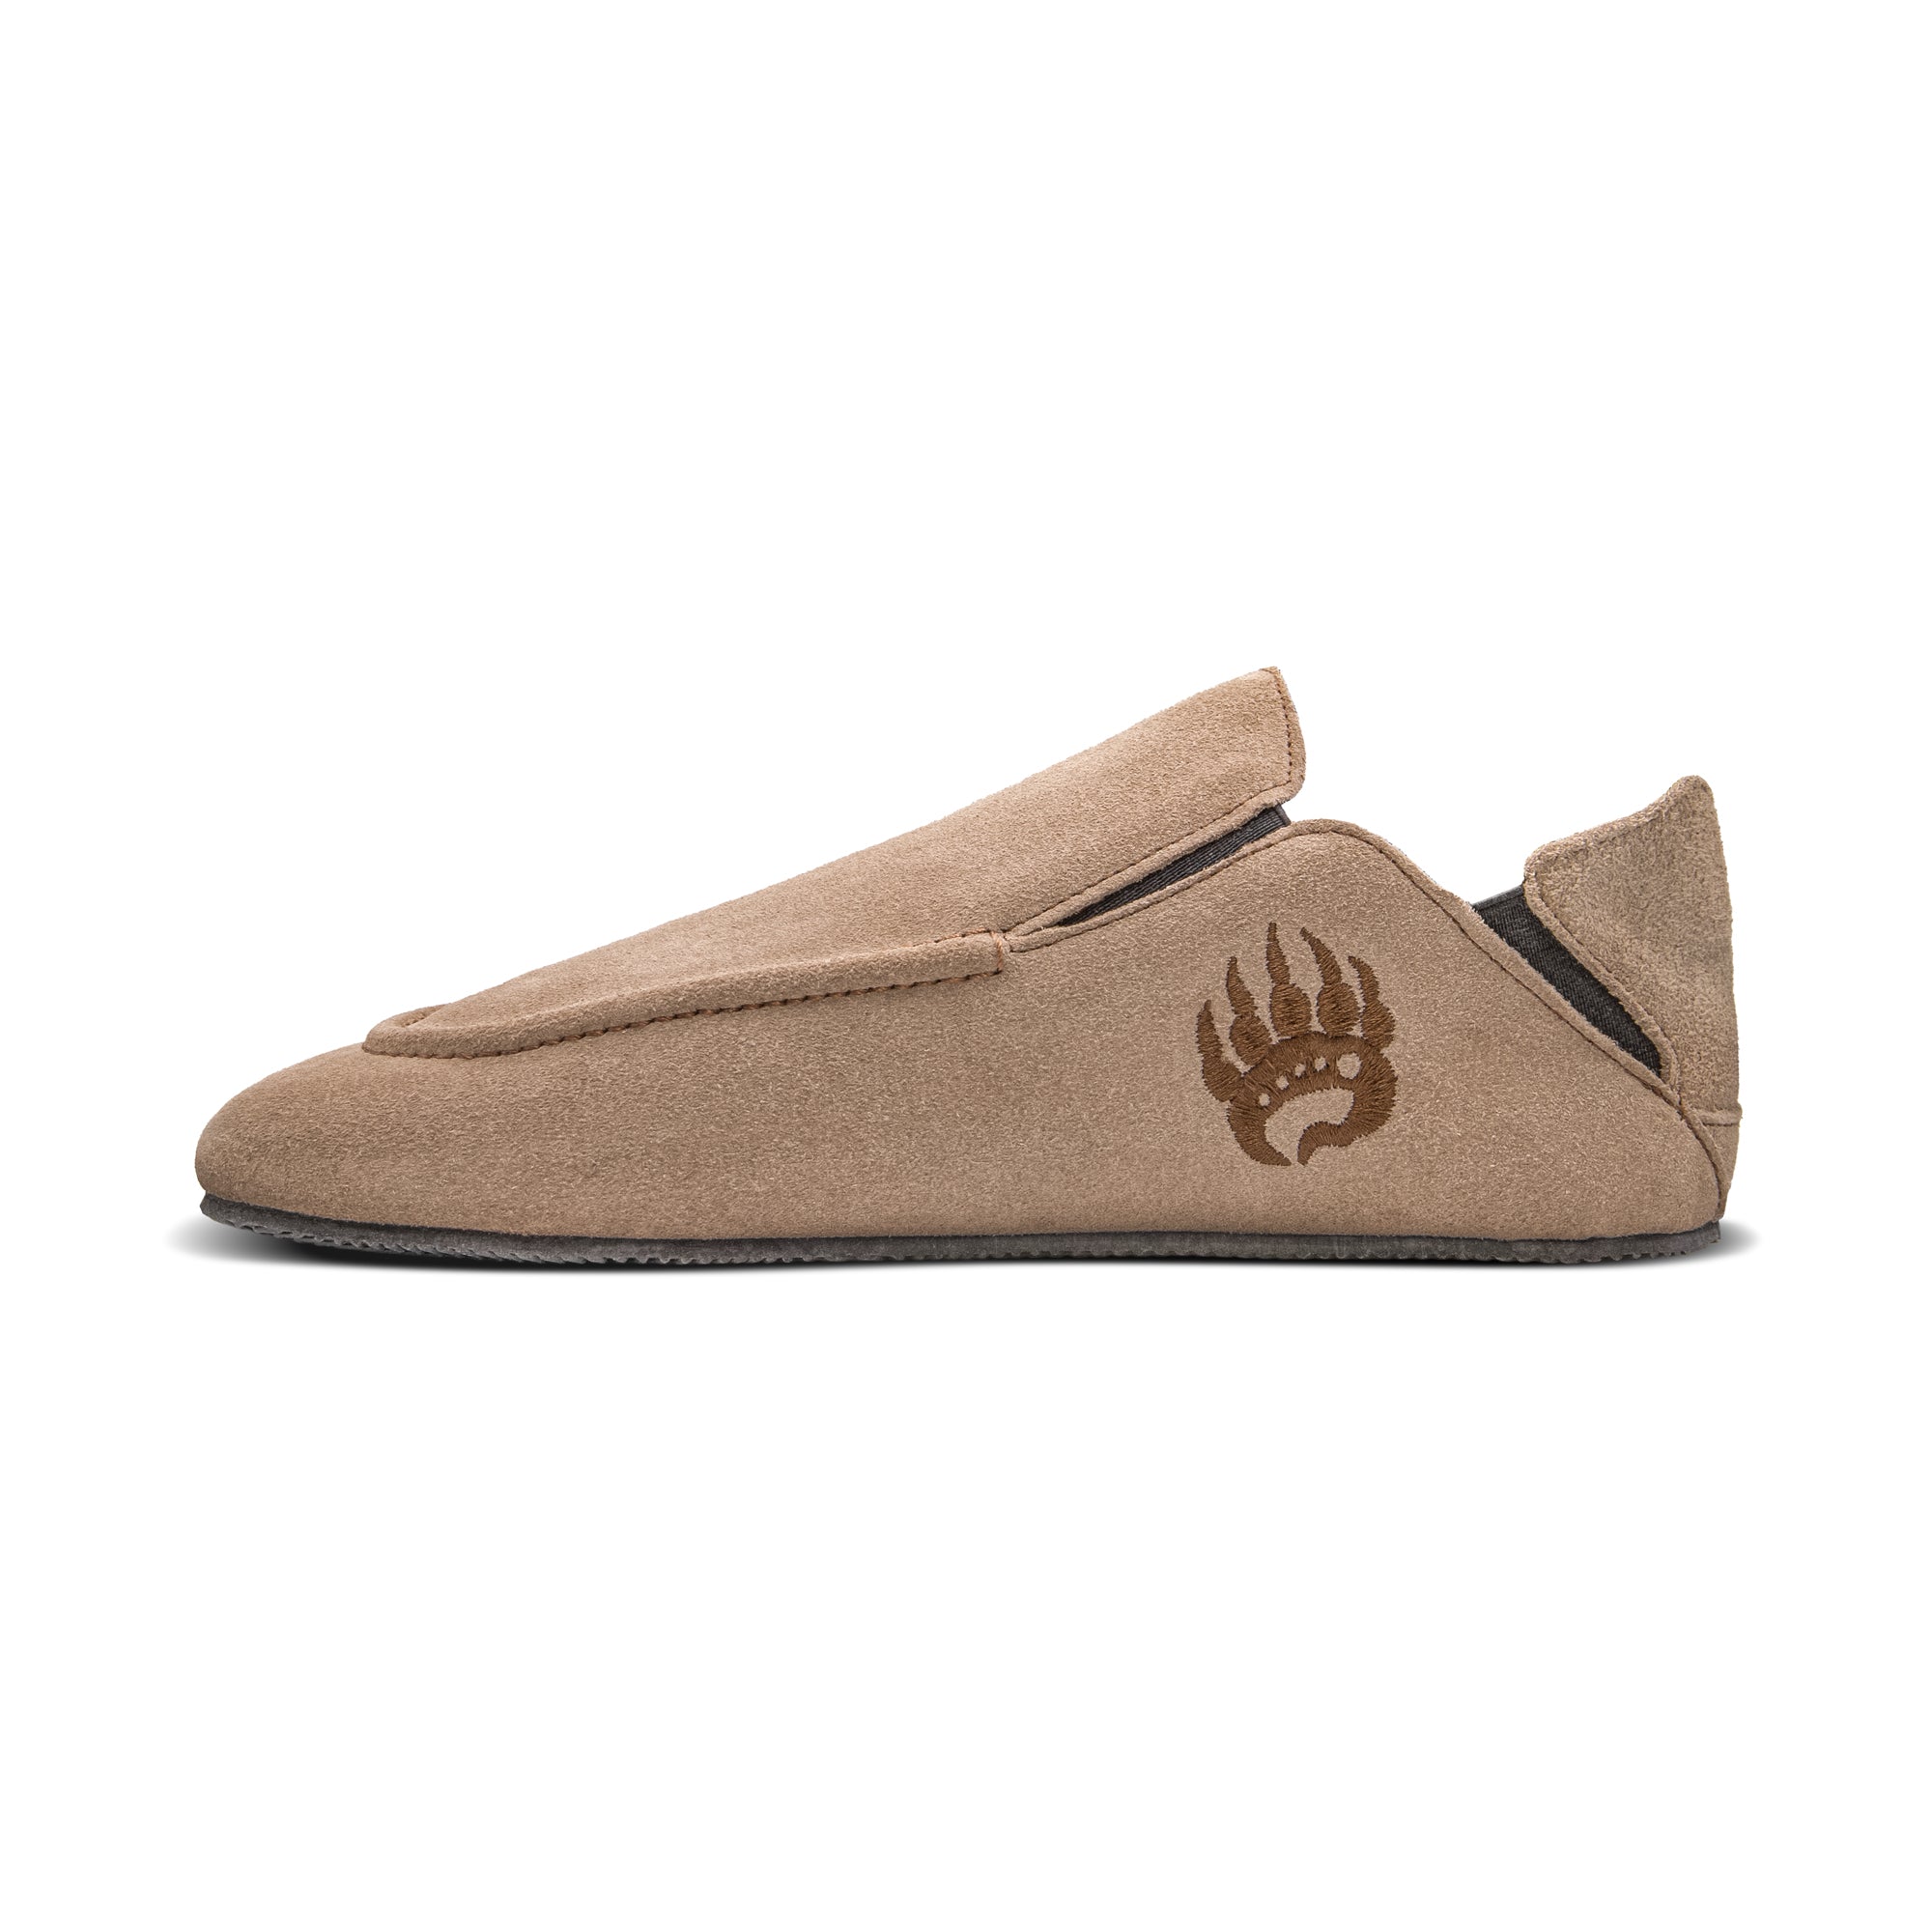 A side view of a Oso Suede slipper with a minimalist design, featuring a dark logo resembling a bear paw near the heel and made from suede leather for a barefoot experience. (Brand Name: Bearfoot)